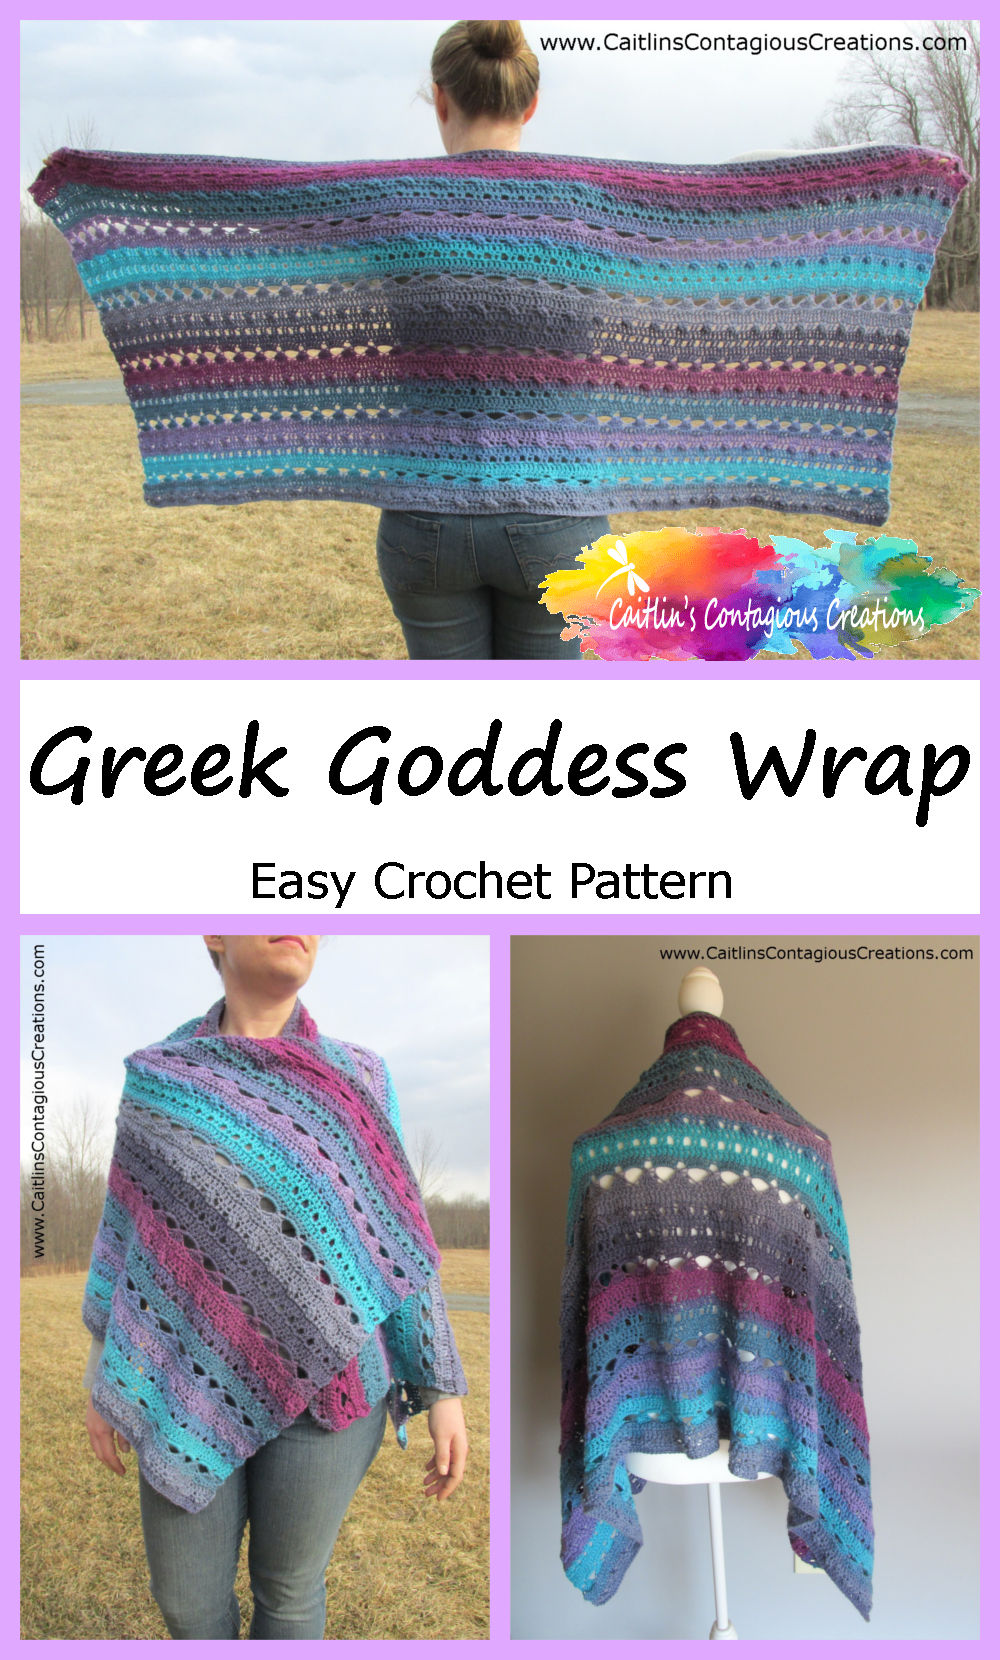 Greek Goddess Wrap Crochet Pattern from Caitlin's Contagious Creations. A free prayer shawl crochet design that is easy and fun! #FreeCrochetPattern #EasyCrochetPattern #WrapCrochetDesign